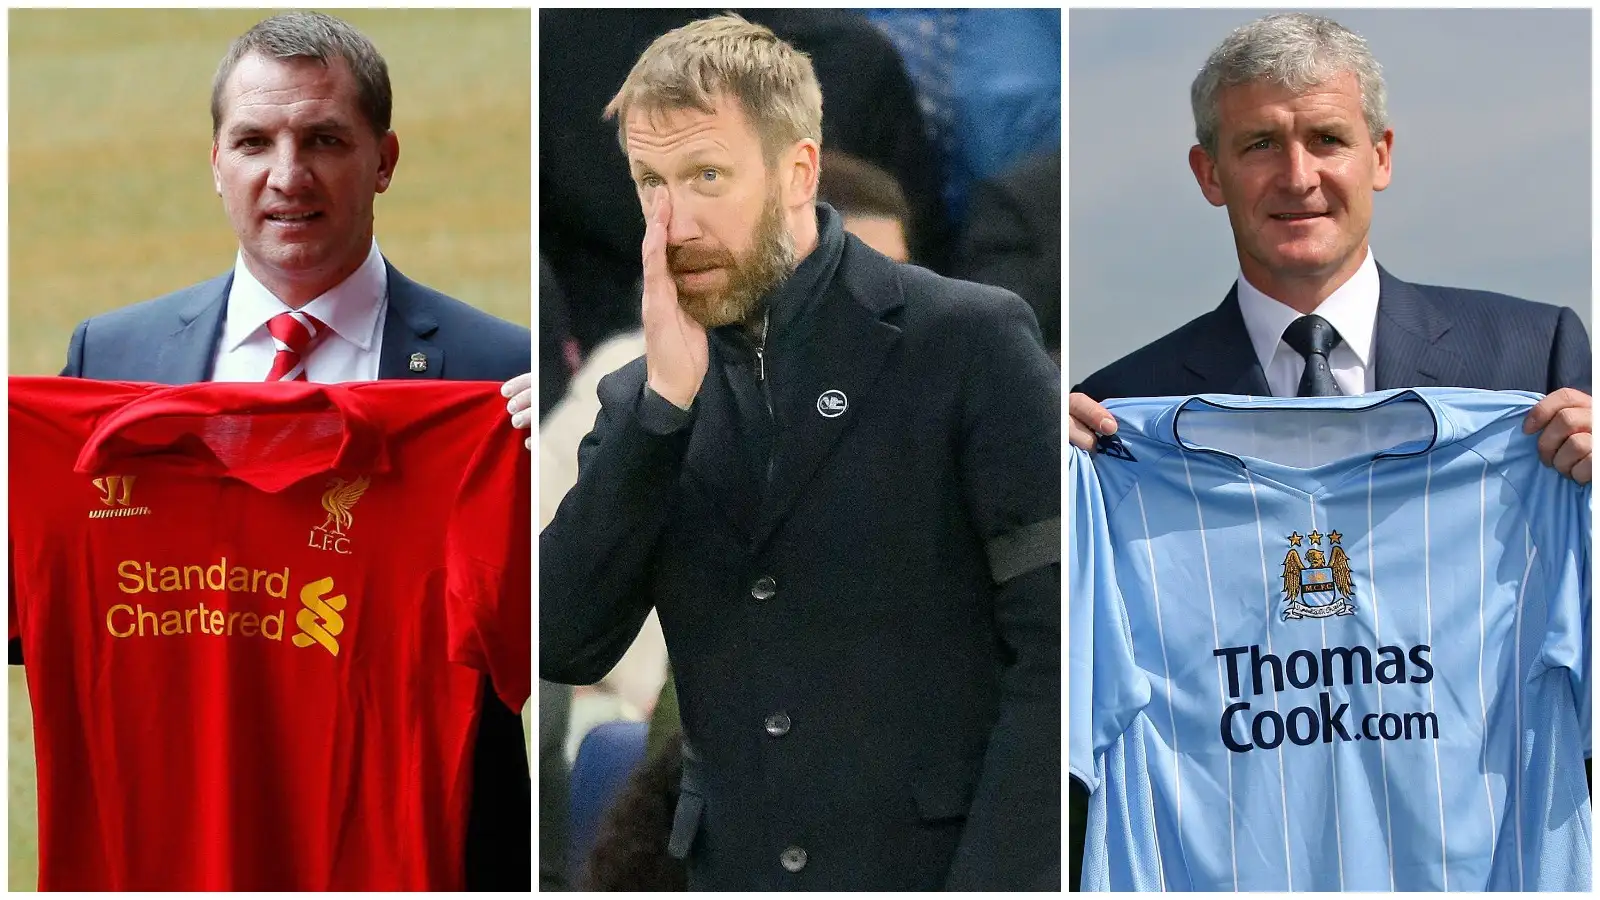 Brendan Rodgers, Graham Potter, and Mark Hughes cost huge compensation fees for Liverpool, Chelsea and Manchester City respectively.